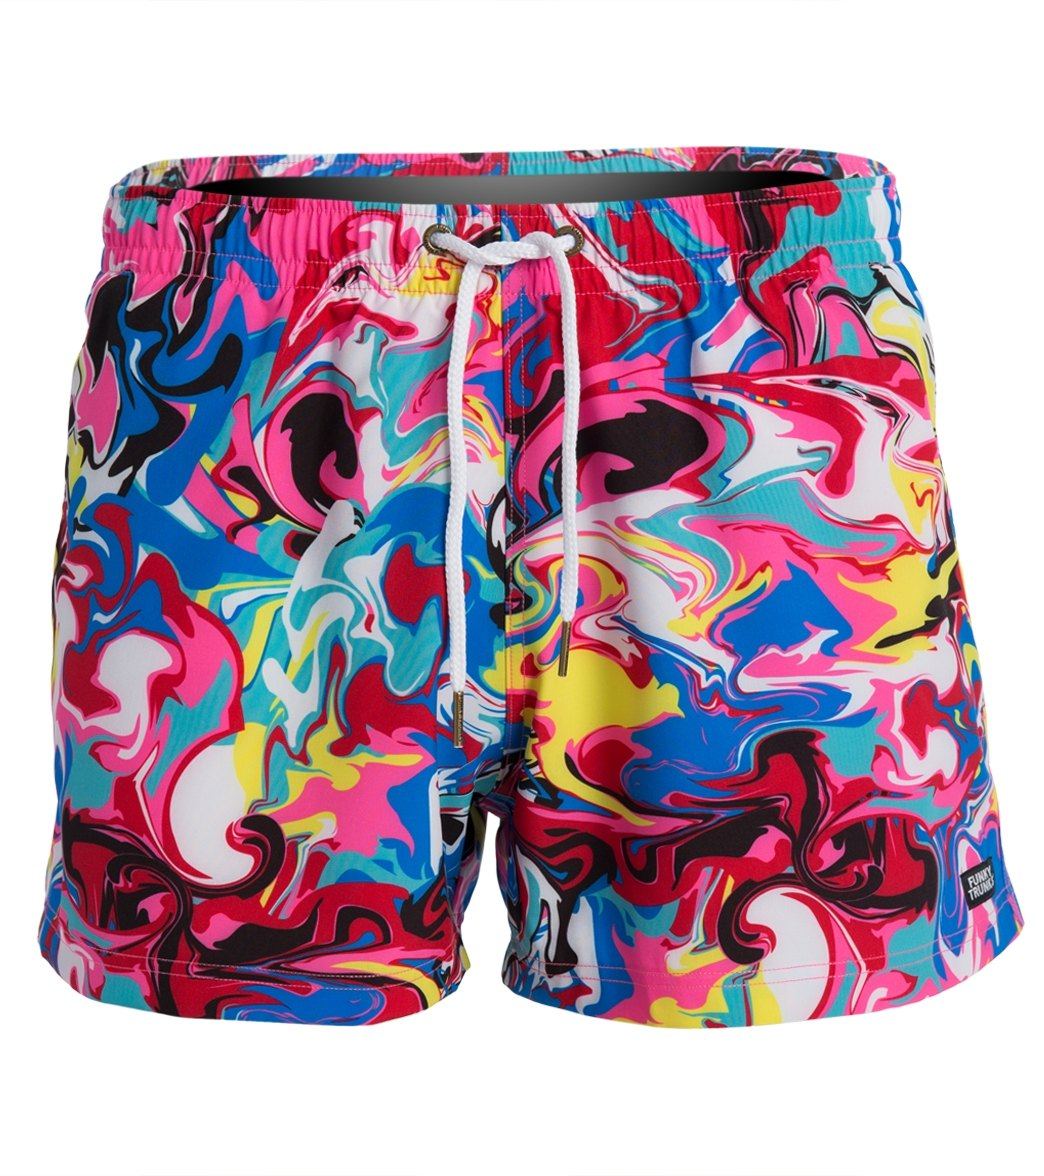 Funky Trunks Splatterfied Watershort at SwimOutlet.com - Free Shipping